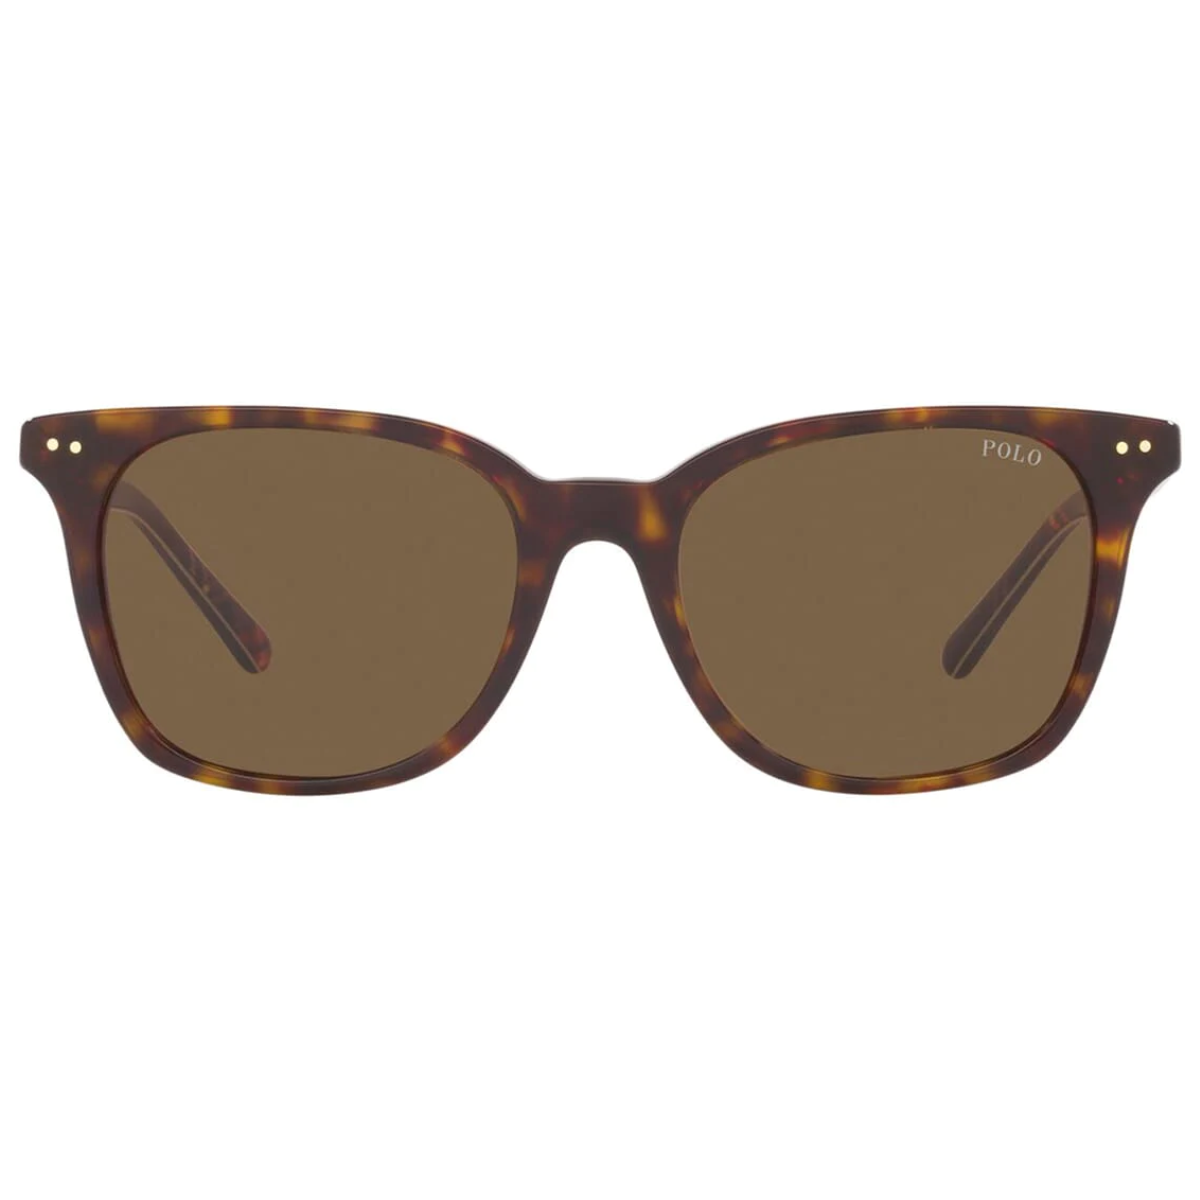 "Ralph Lauren Polo PH4187 Square Sunglasses for Men - stylish square shape frame, top brands quality, durable acetate, non-polarized lenses. Choose dark grey or brown lenses, black or brown temples. Shop now at Optorium for the coolest sunglasses for men!"